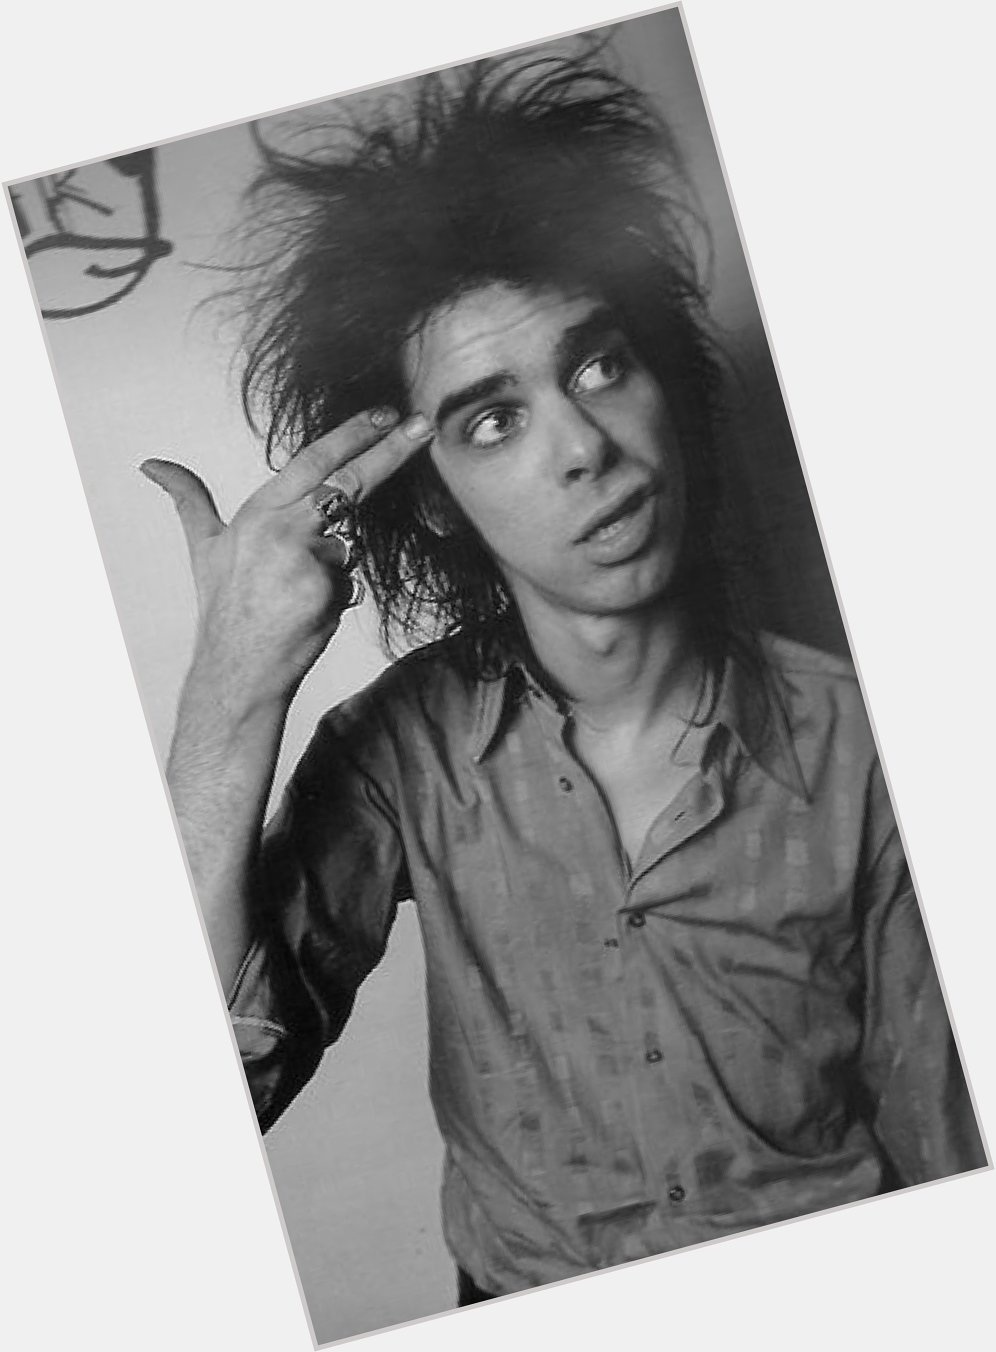 Happy birthday to the godlike genius that is Nick Cave. We are not worthy 